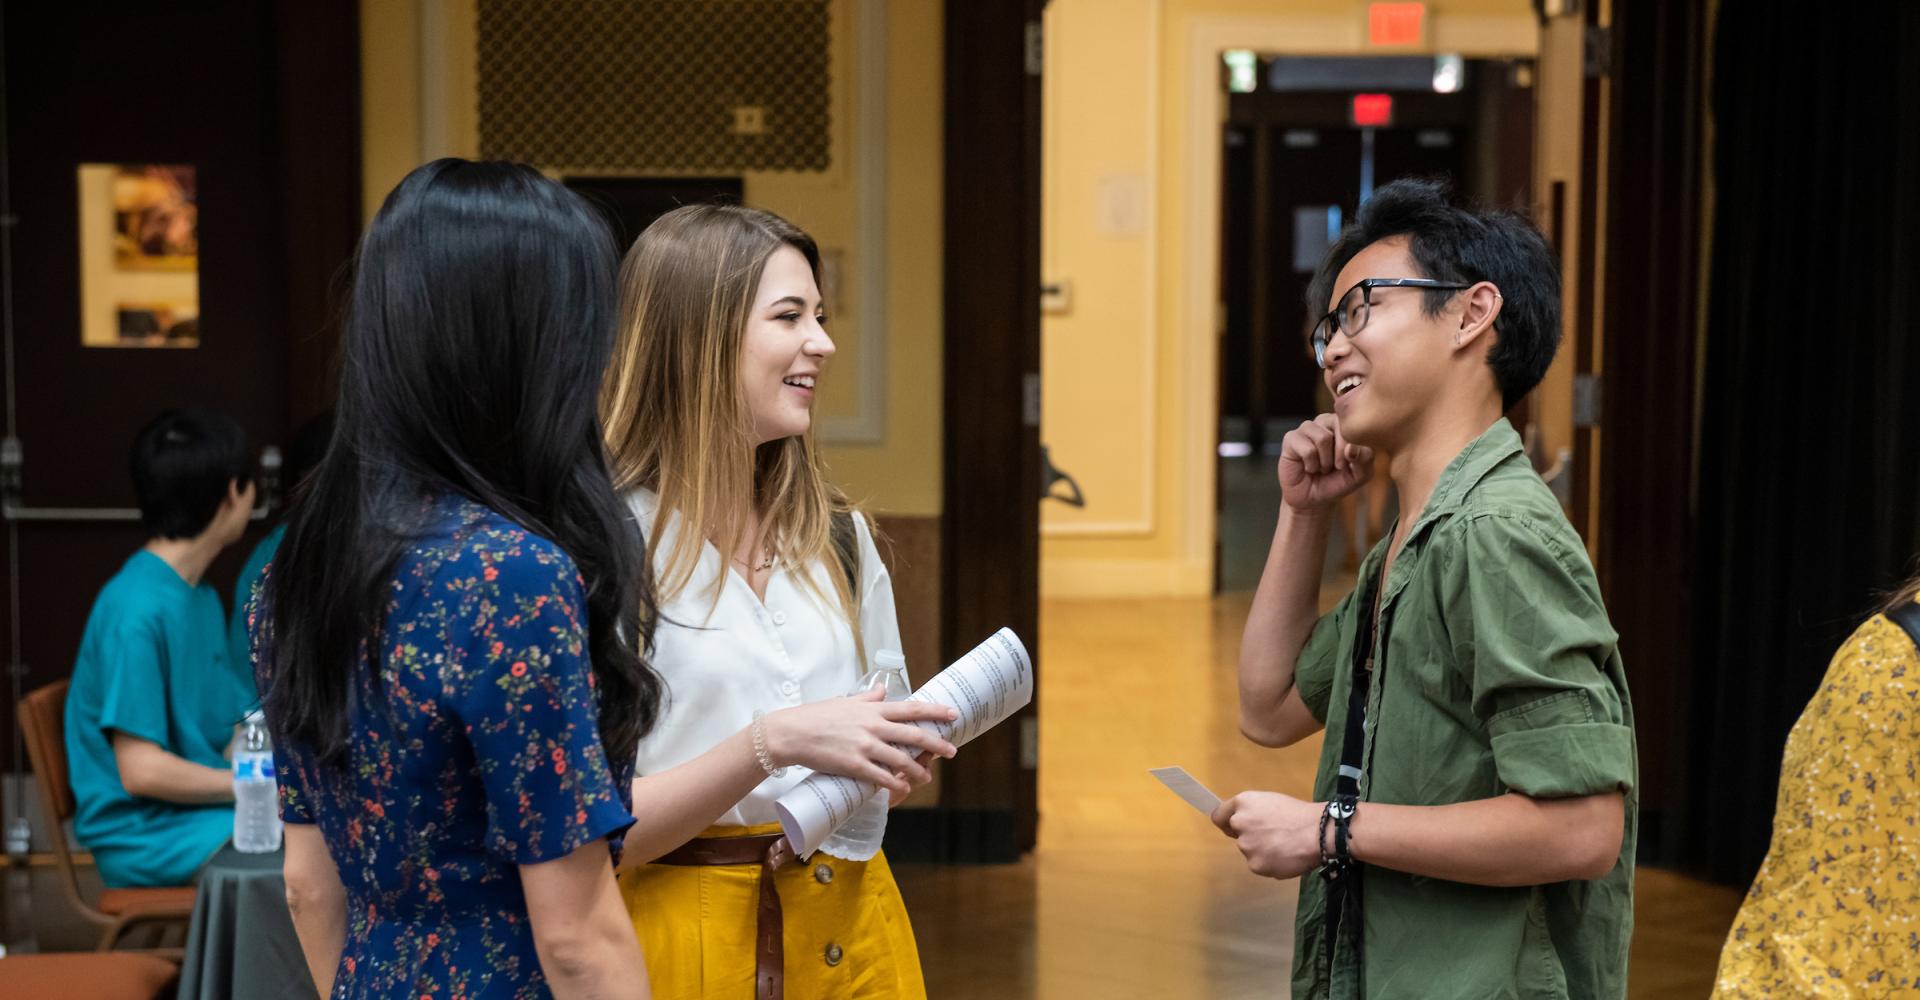 Students at Orientation 2019